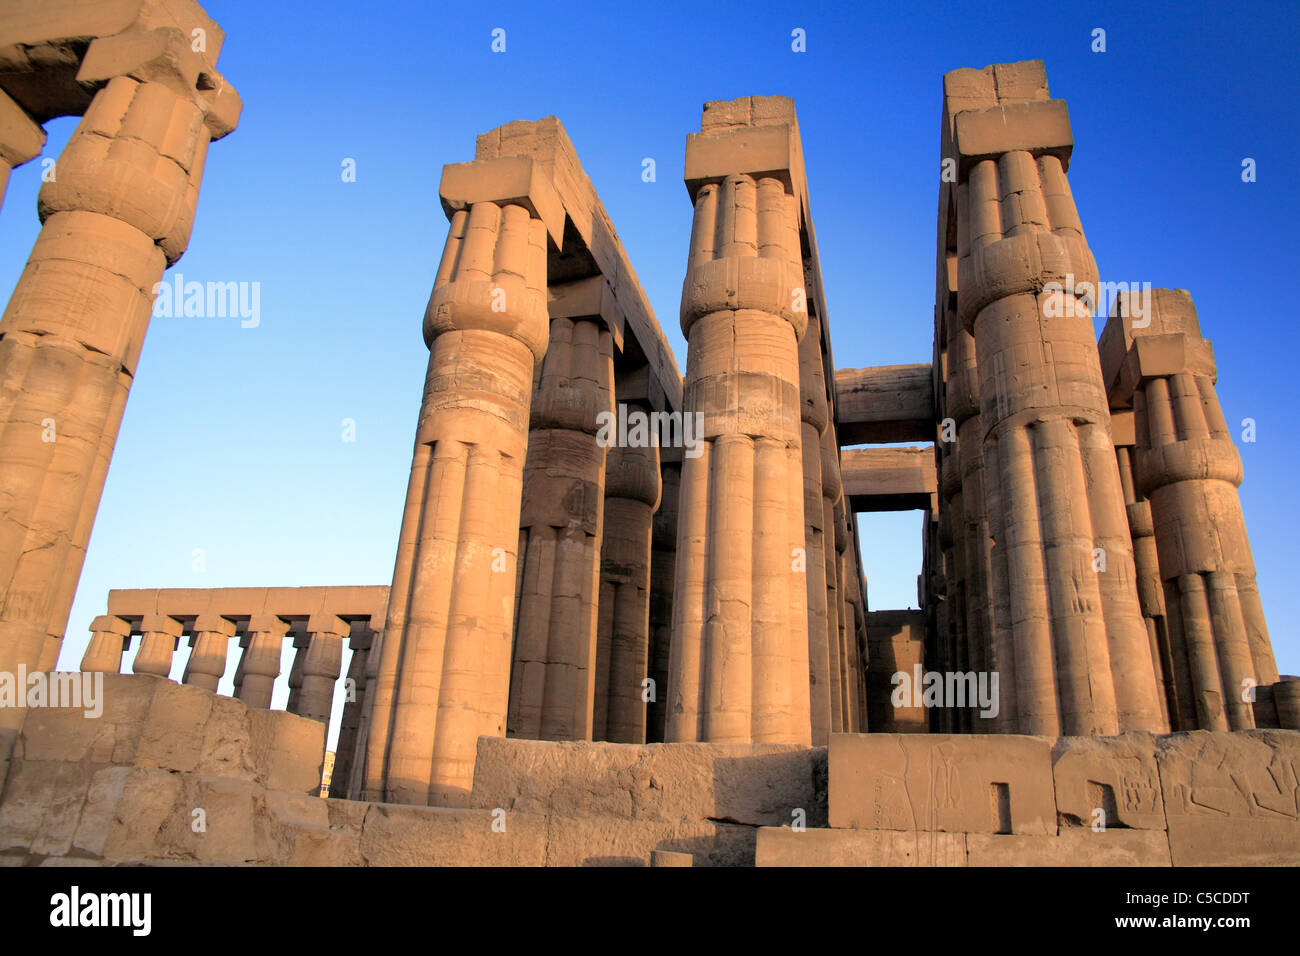 Hypostyle Hall and court of Amenhotep III (c. 1370 BC), Luxor, Egypt Stock Photo